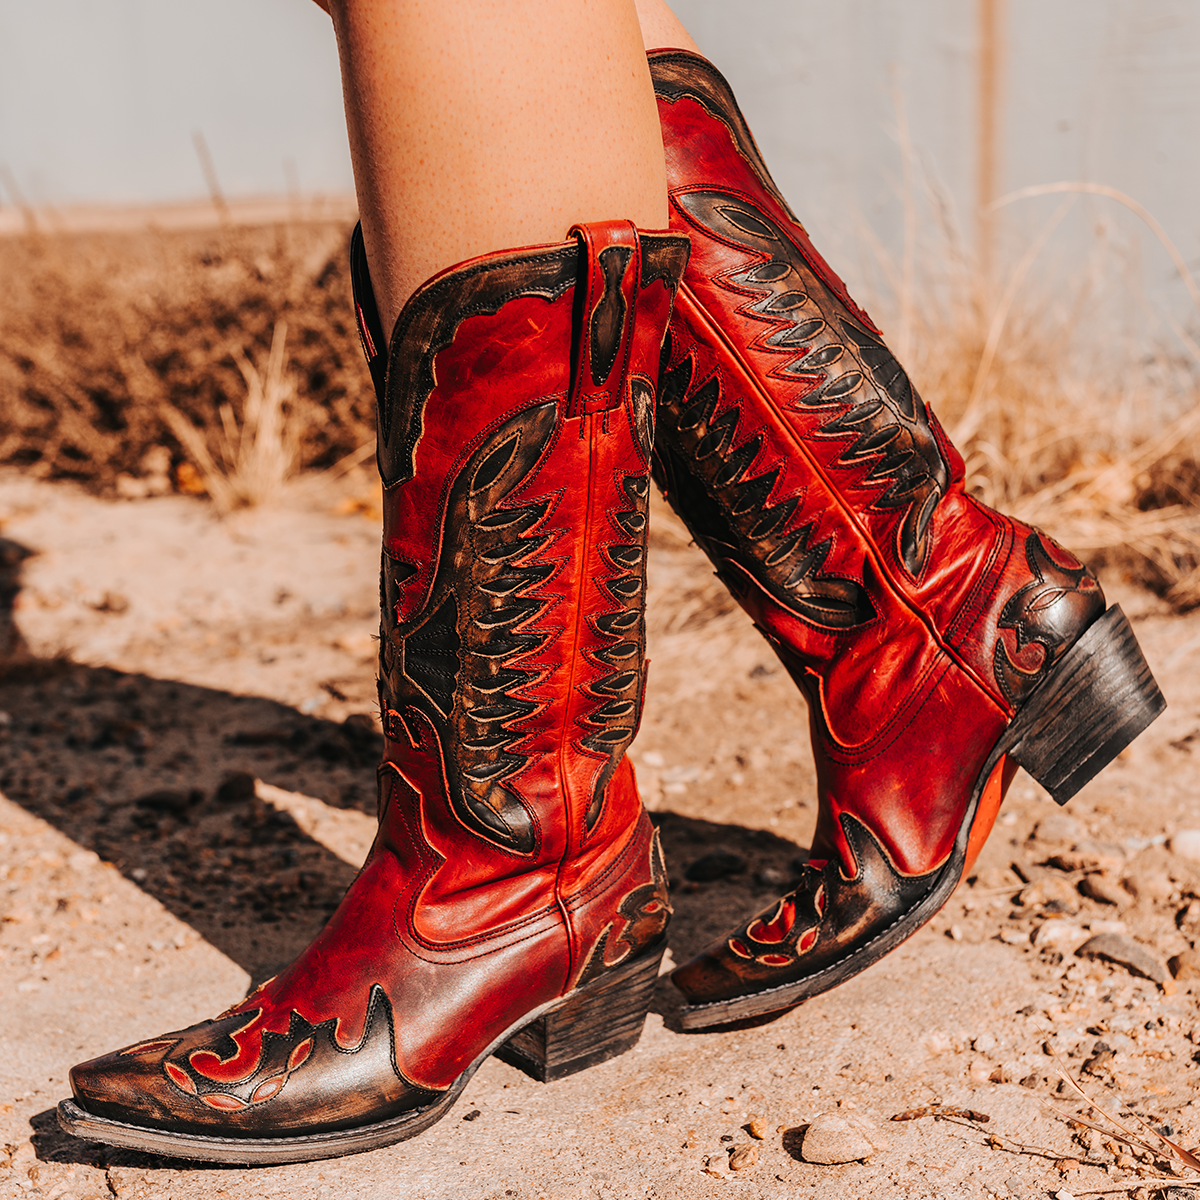 FREEBIRD women's Willie red multi leather western boot with textured design, stitch detailing, and snip toe construction